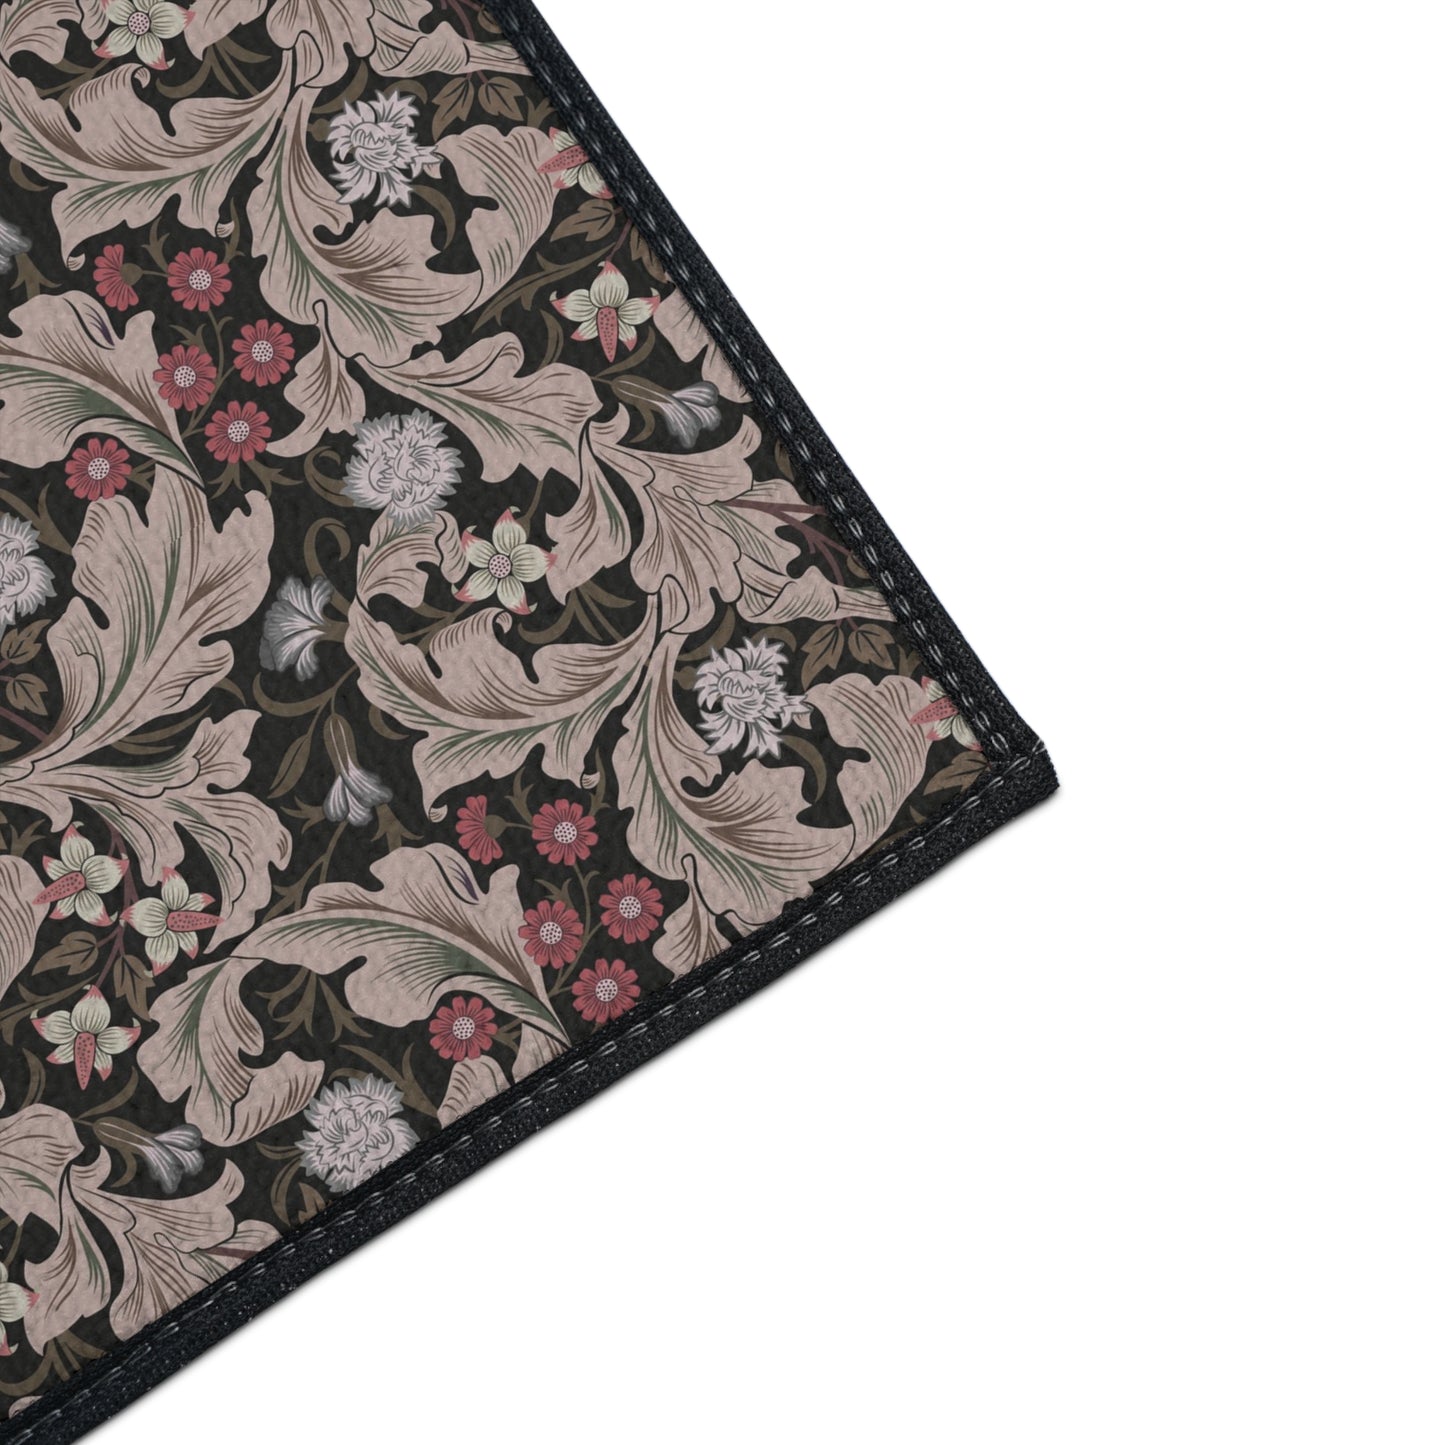 william-morris-co-heavy-duty-floor-mat-leicester-collection-mocha-14